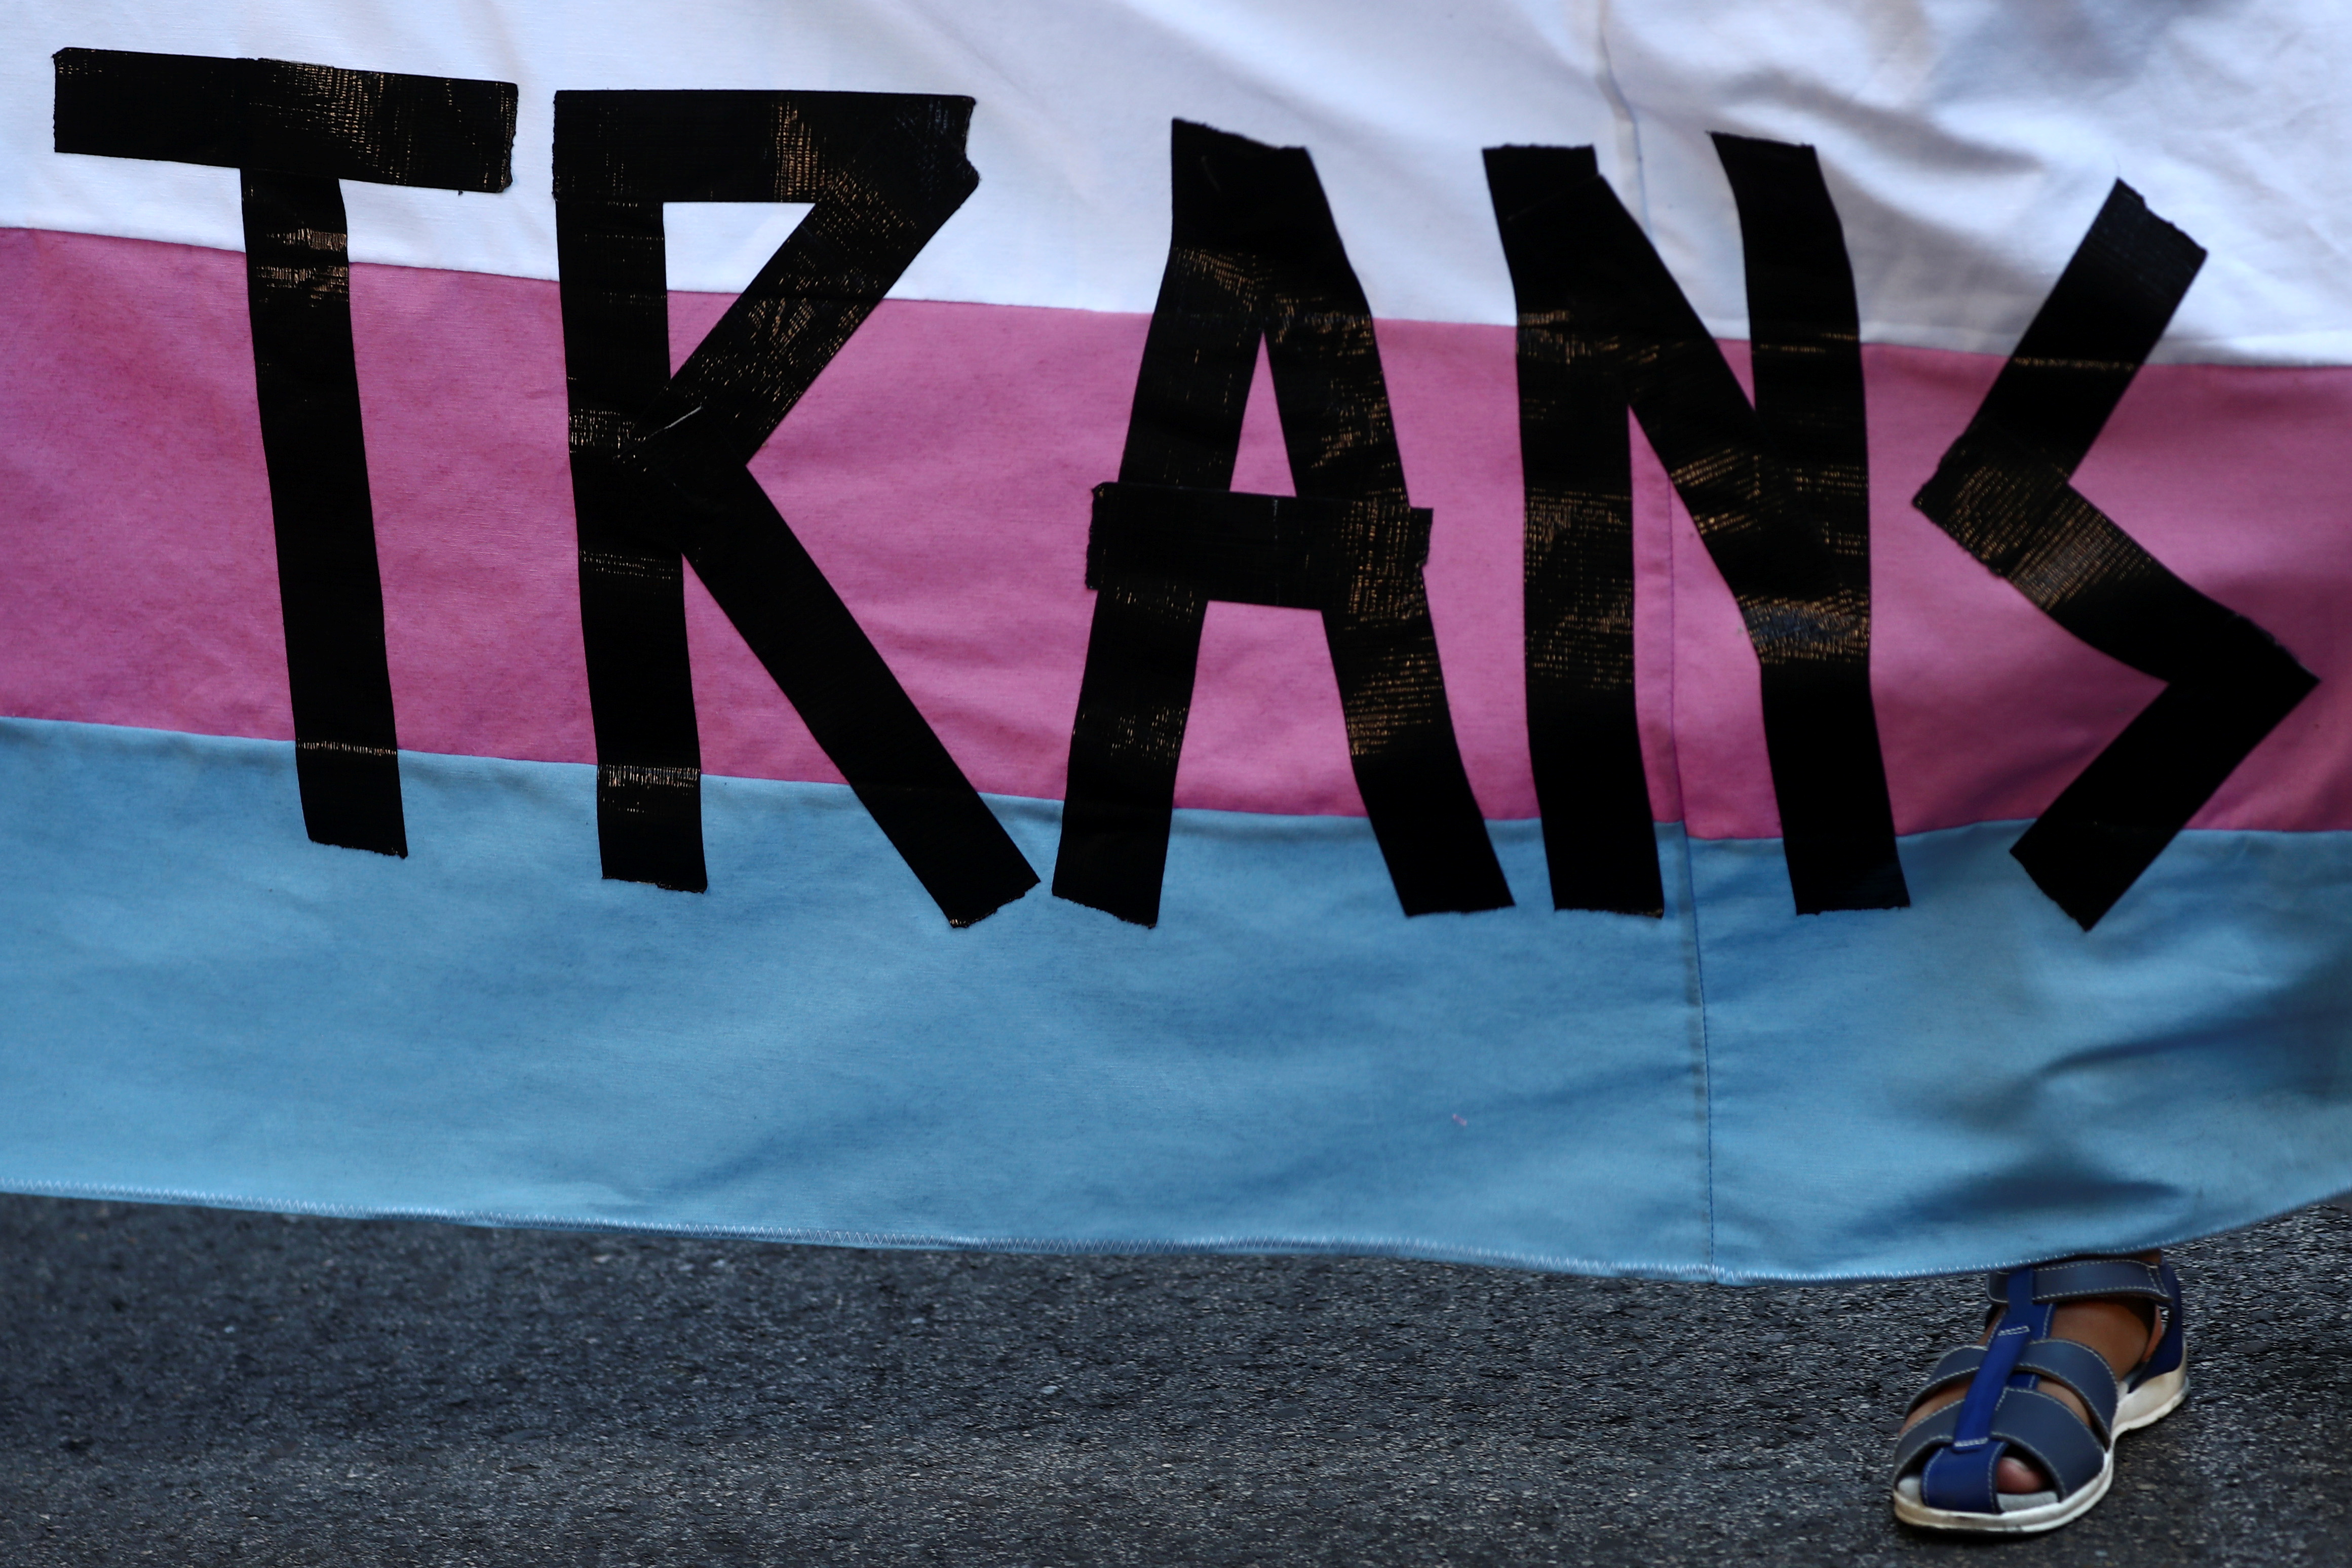 Pete, 9, a transgender minor, holds a banner as he takes part in a protest to mark LGBT Pride Day in Madrid, Spain, June 28, 2021. REUTERS/Sergio Perez